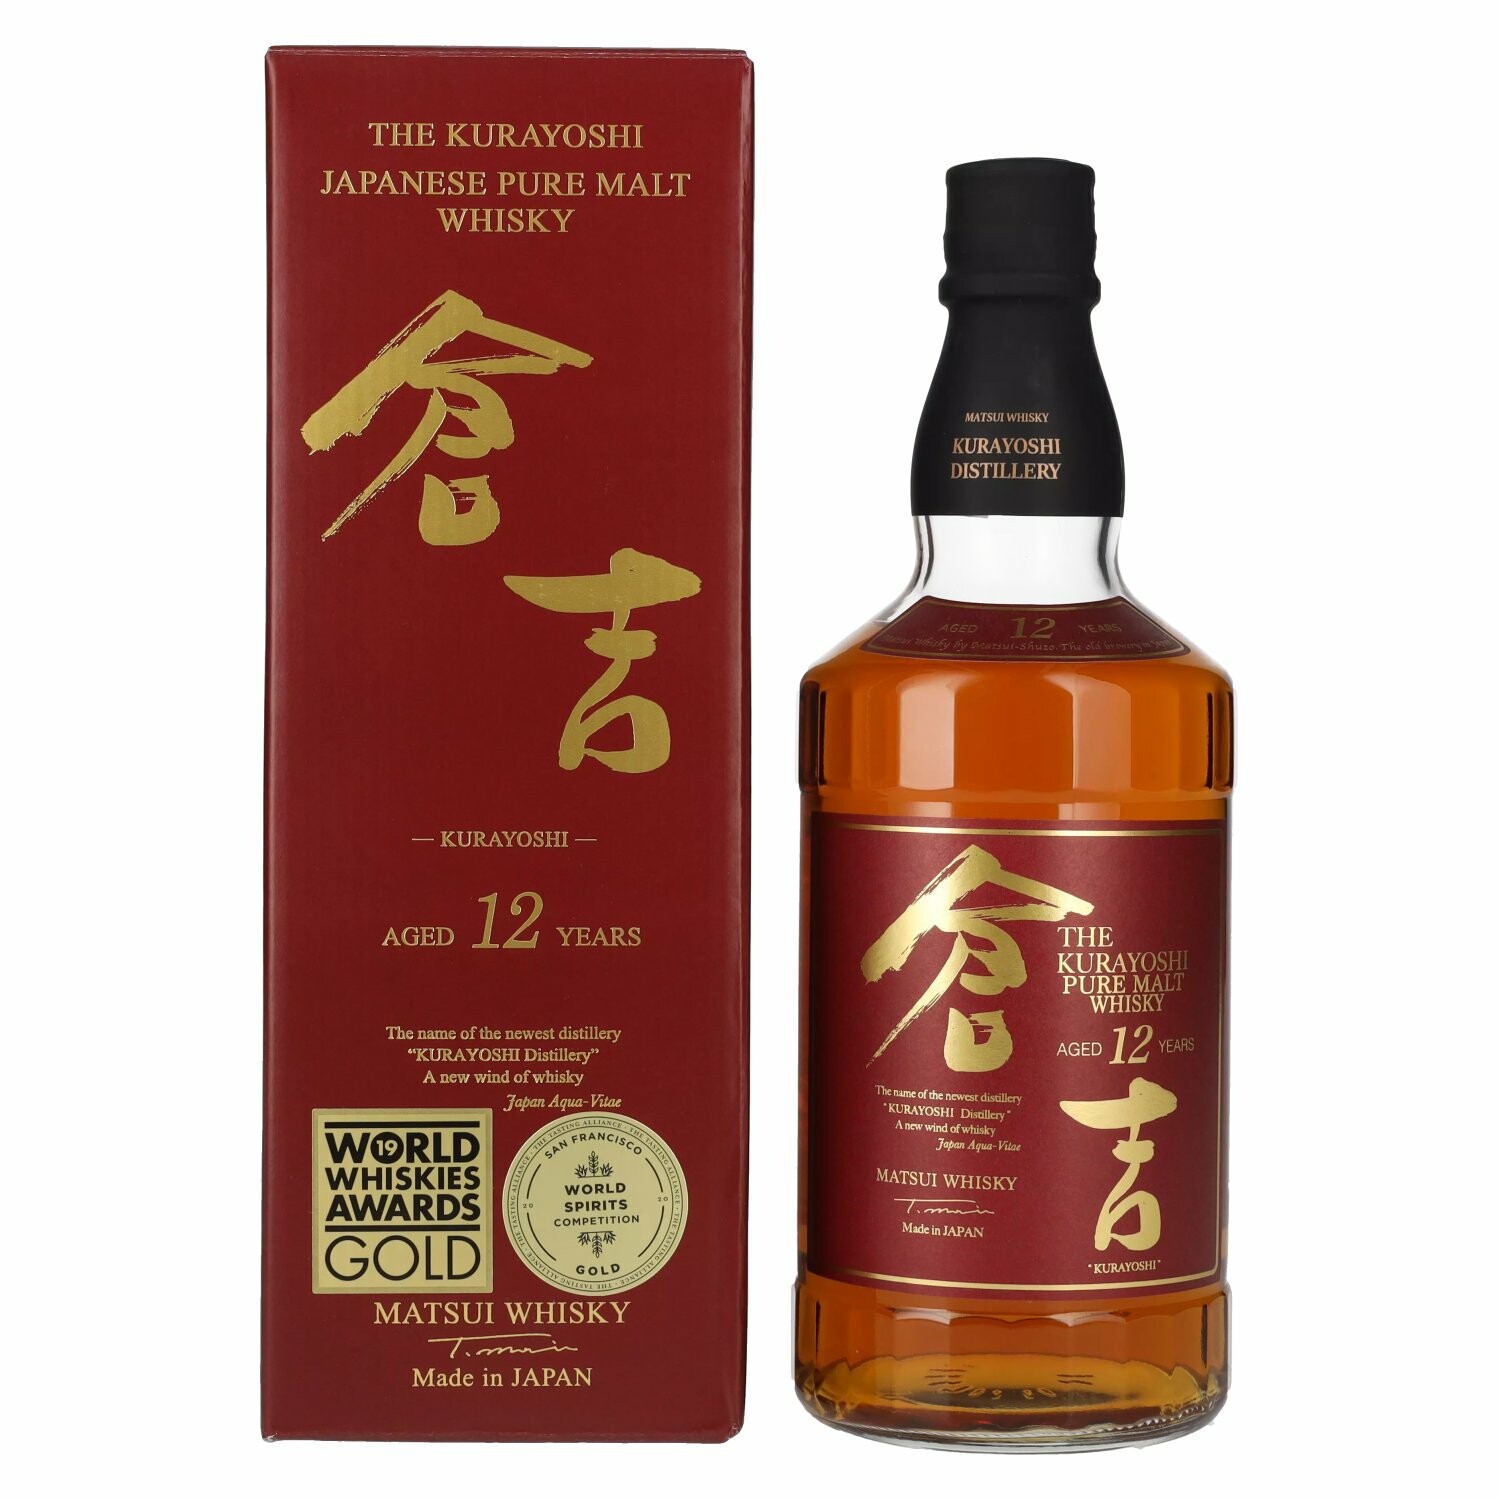 Matsui Whisky THE KURAYOSHI 12 Years Old Pure Malt Whisky 43% Vol. 0,7l in Giftbox